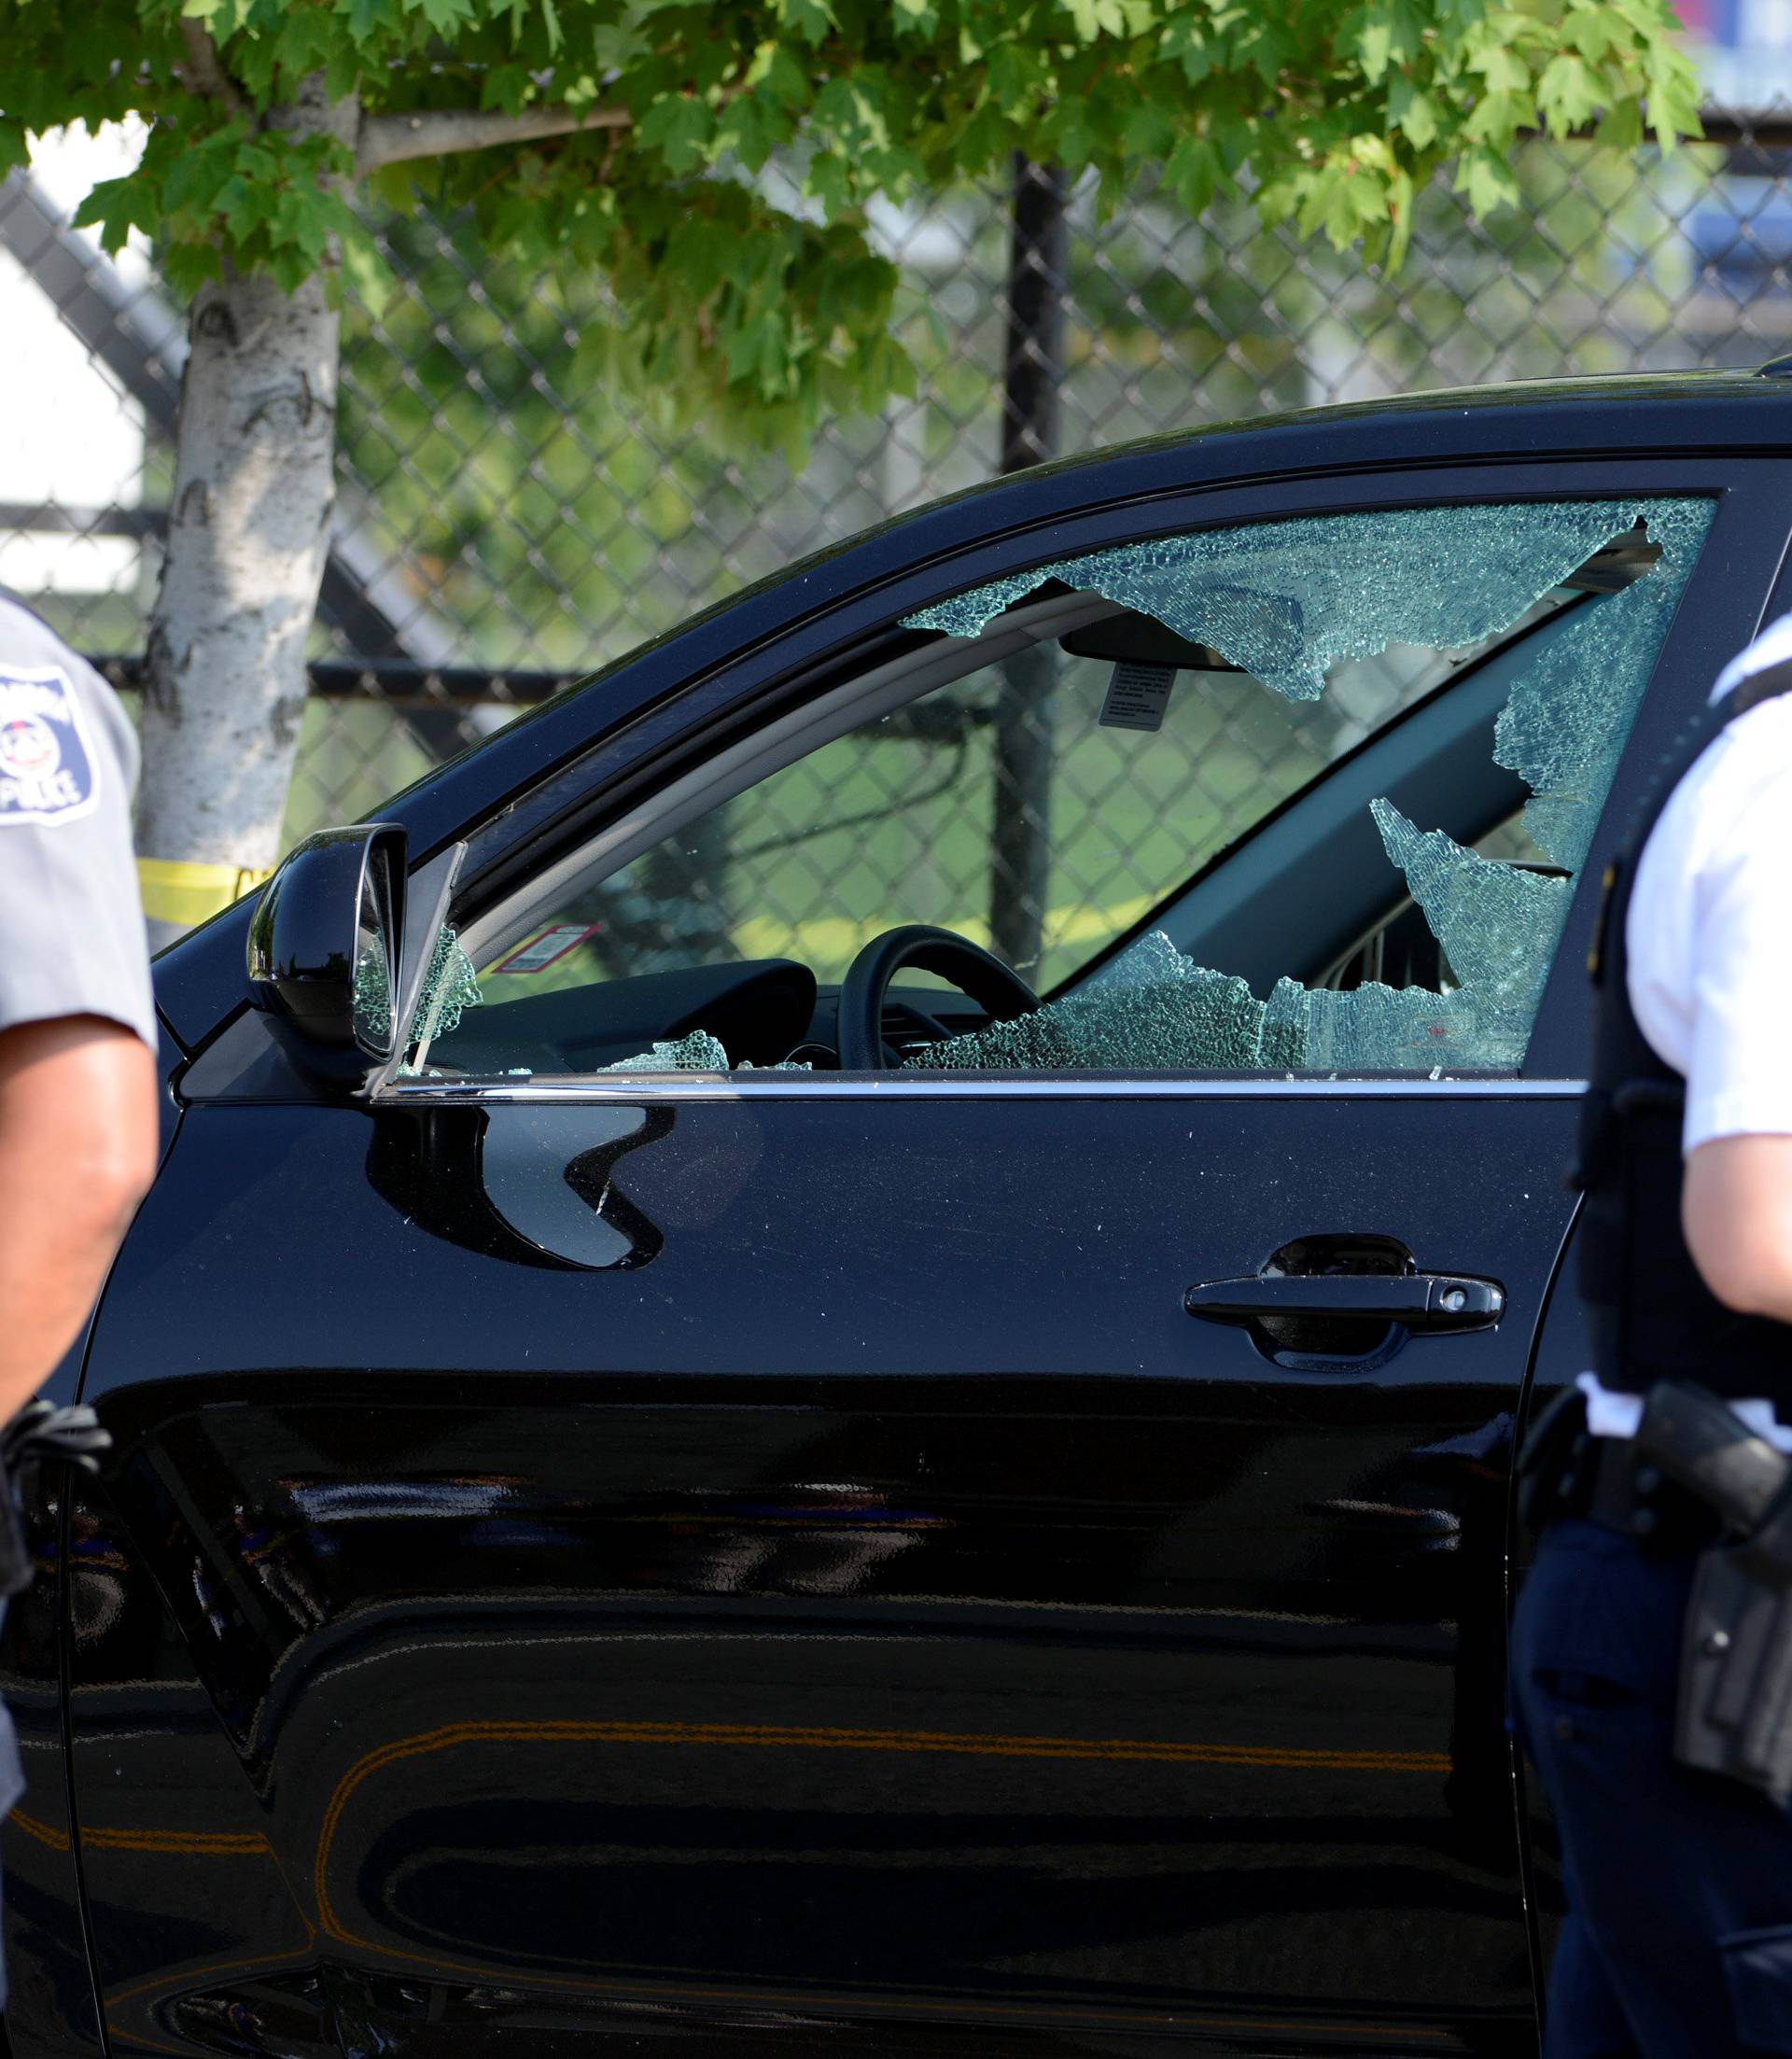 A vehicle window is shattered as police secure the scene where shots were fired during a Congressional baseball practice, wounding House Majority Whip Steve Scalise, in Alexandria